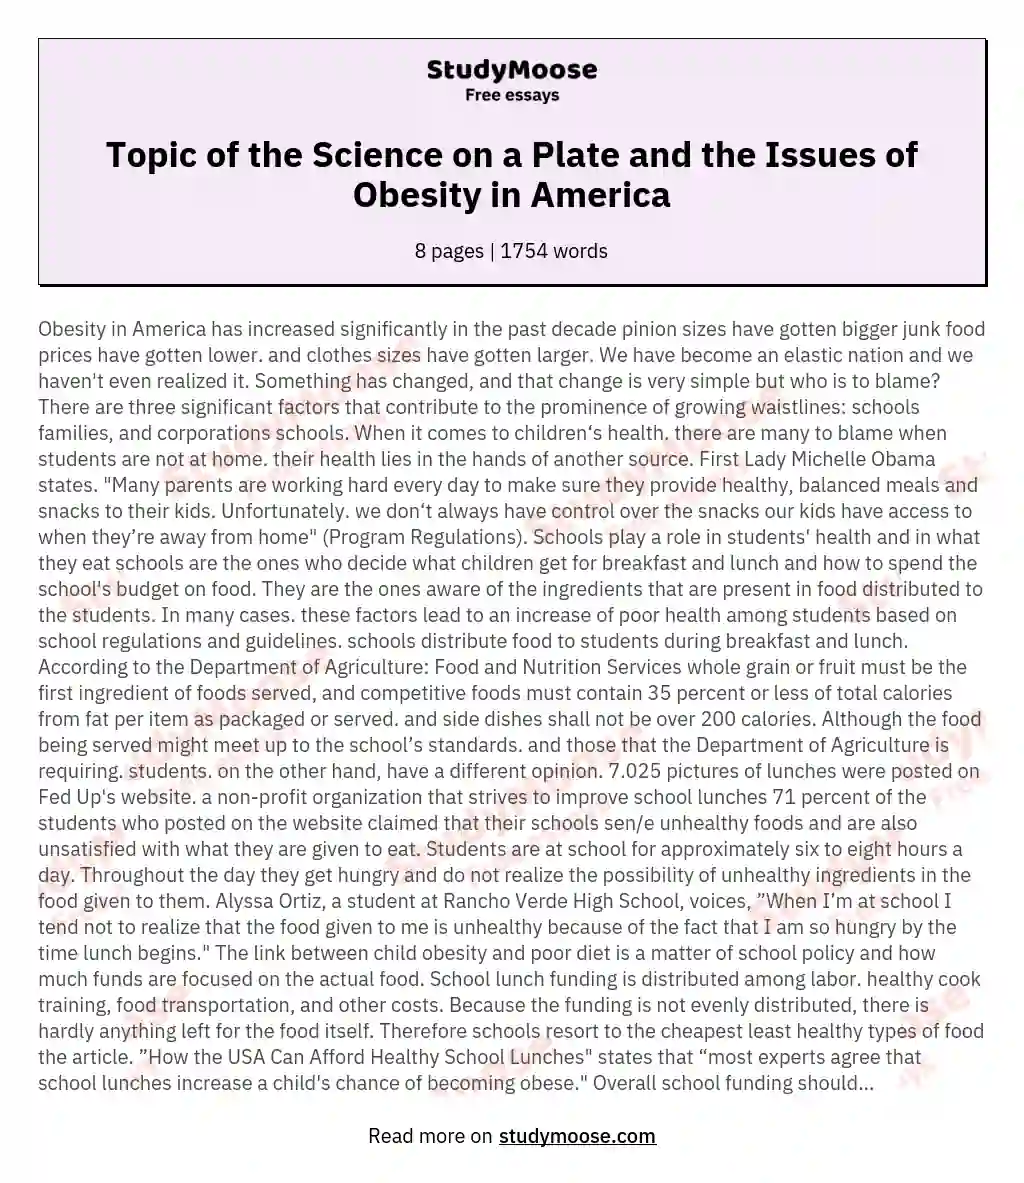 Topic of the Science on a Plate and the Issues of Obesity in America essay